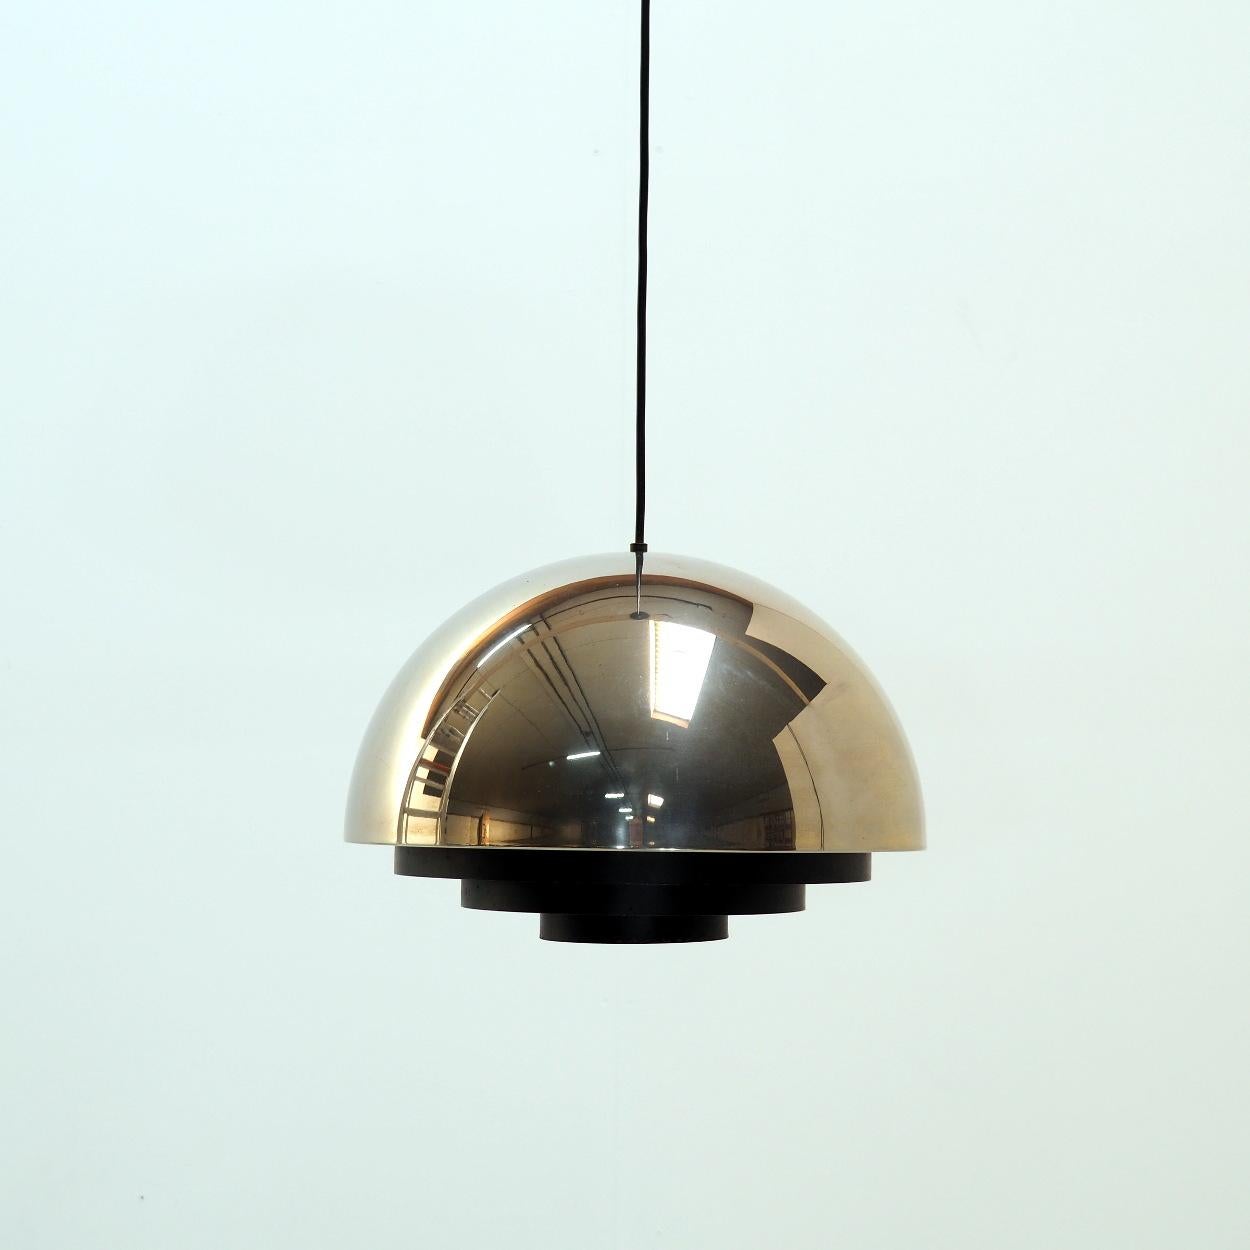 Pendant ‘Milieu’ by Jo Hammerborg for the Danish manufacturer Fog & Morup.

This is the brass version with a black painted metal difuser. A design from the1960s.

The lamp is in good vintage condition with wear and tear corresponding with age.